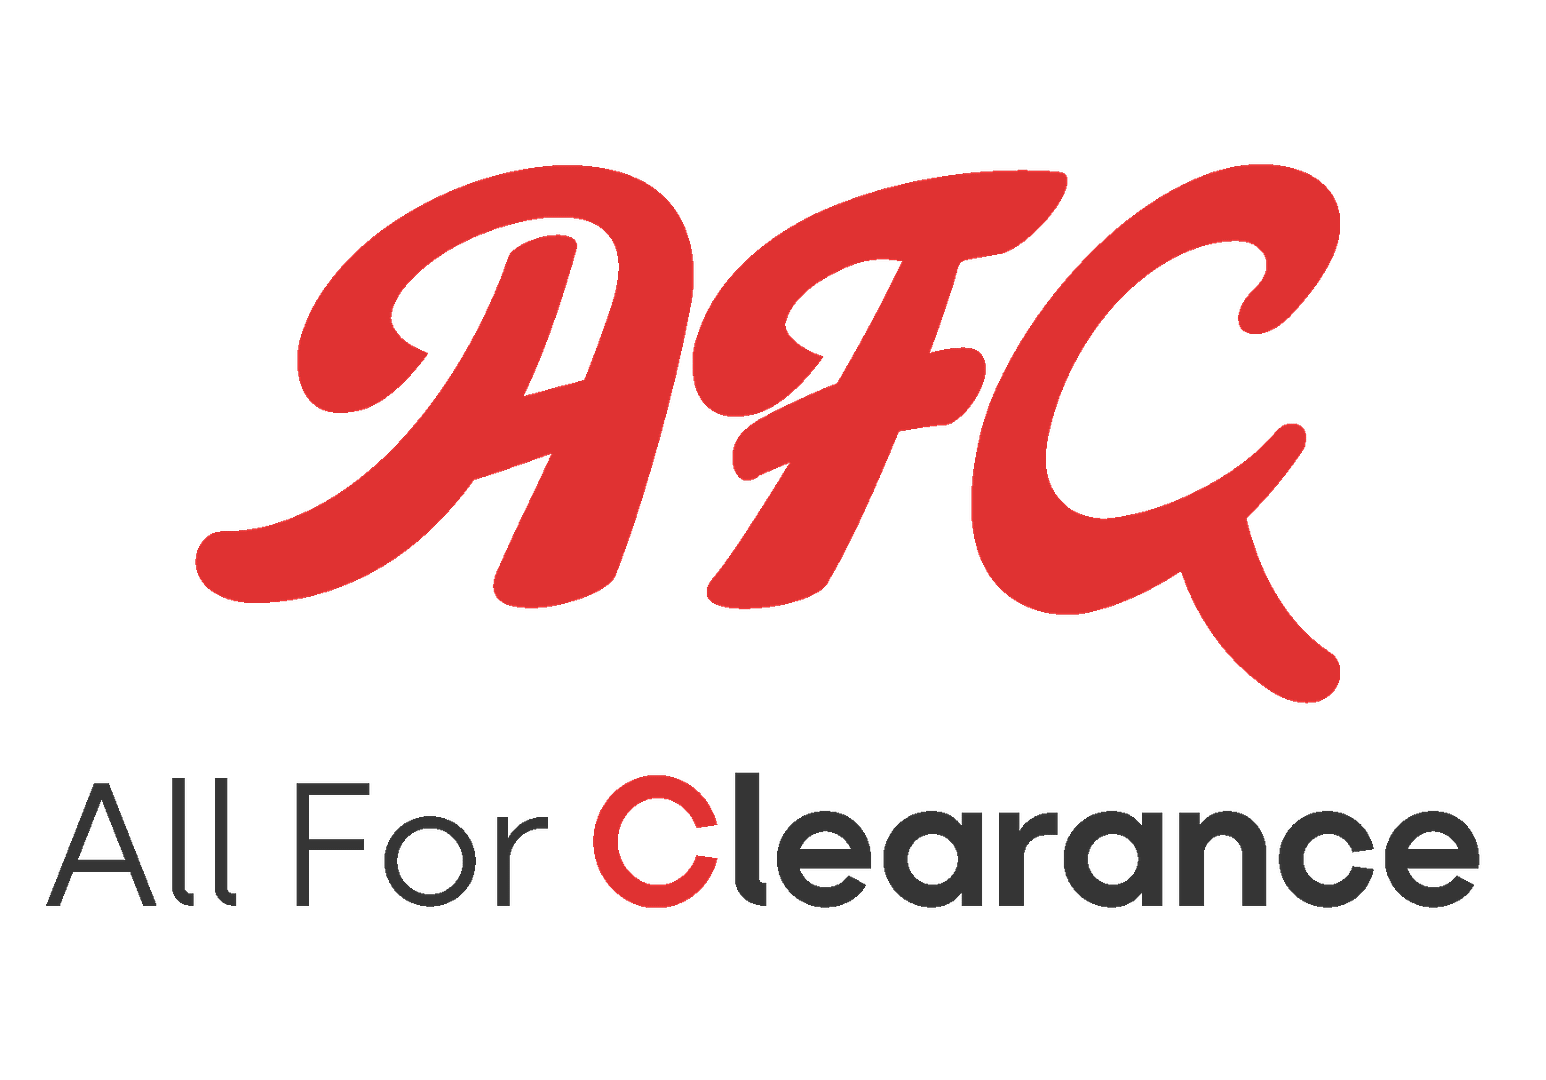 All For Clearance logo